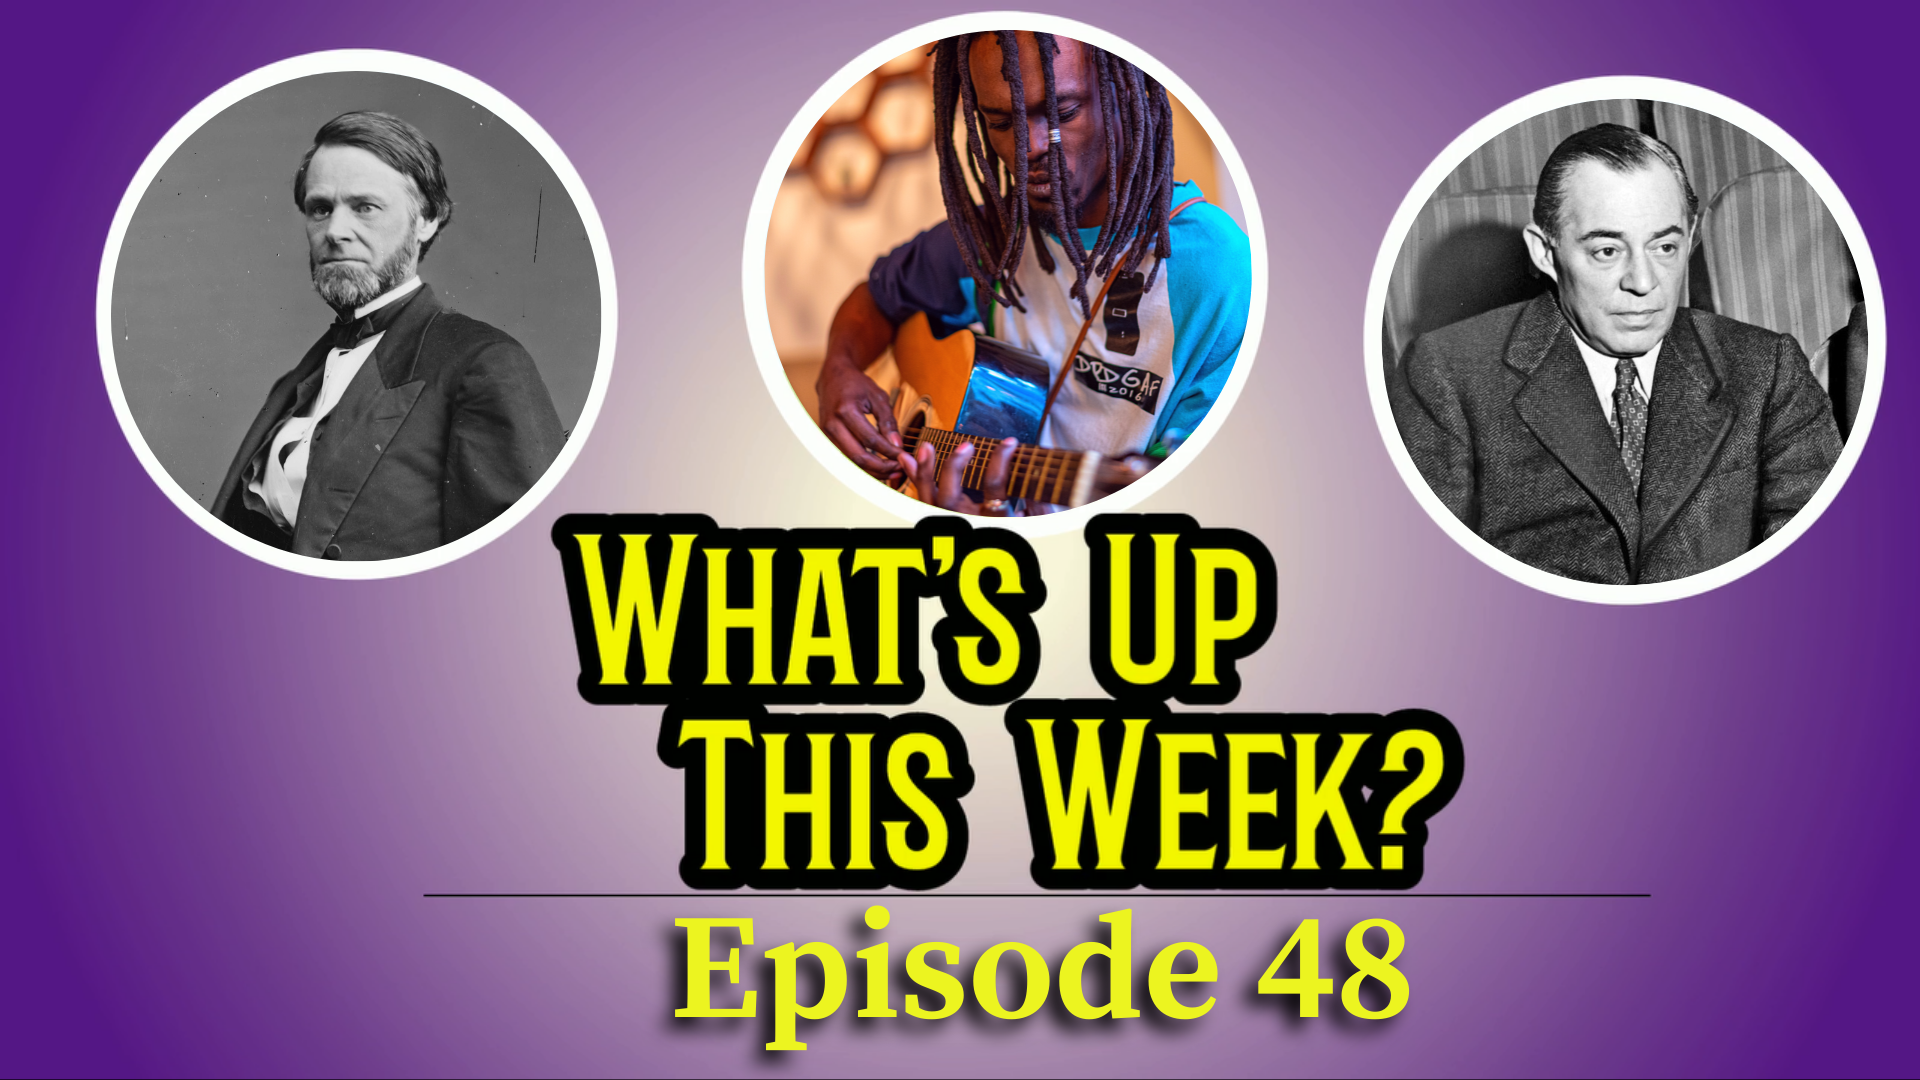 Text: What's Up This Week? Episode 29. 3 images in circles: John Sherman, a reggae musician, and Richard Rodgers.